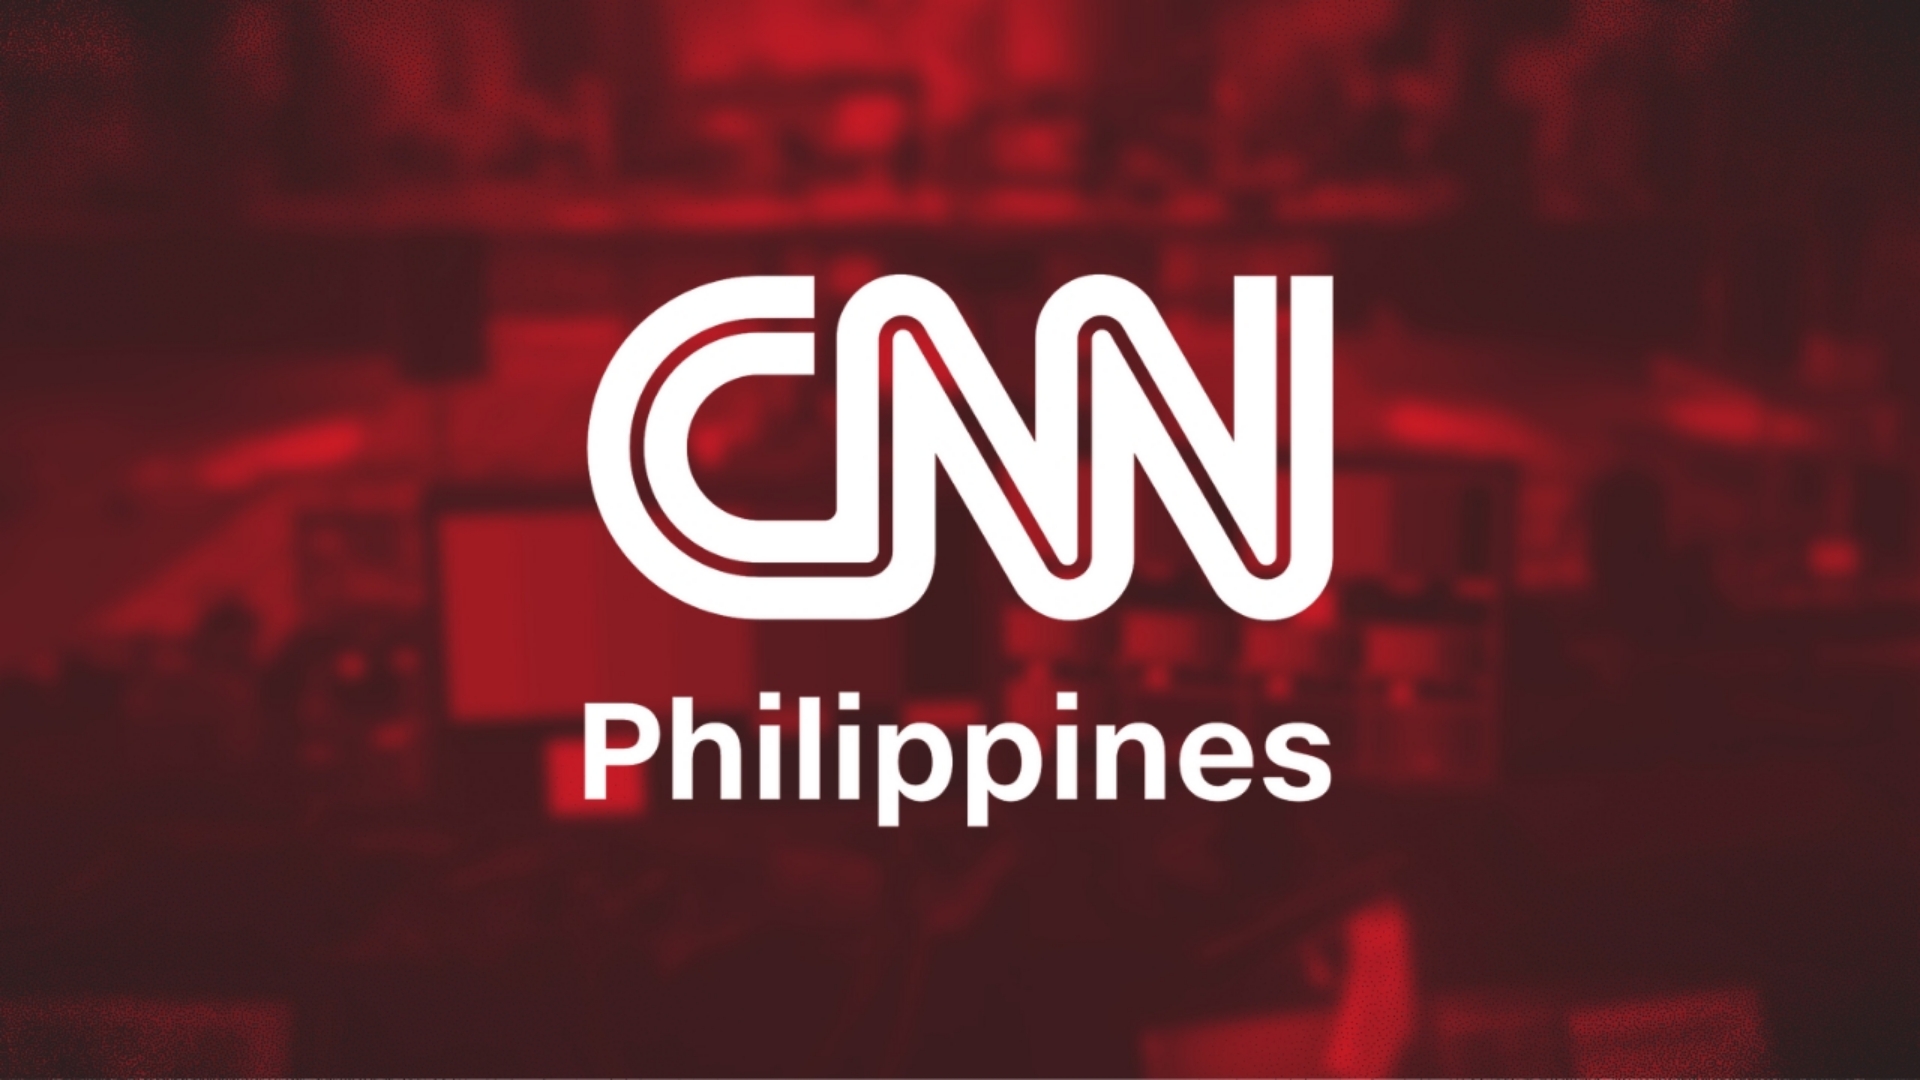 CNN Philippines ceases operations on Jan 31